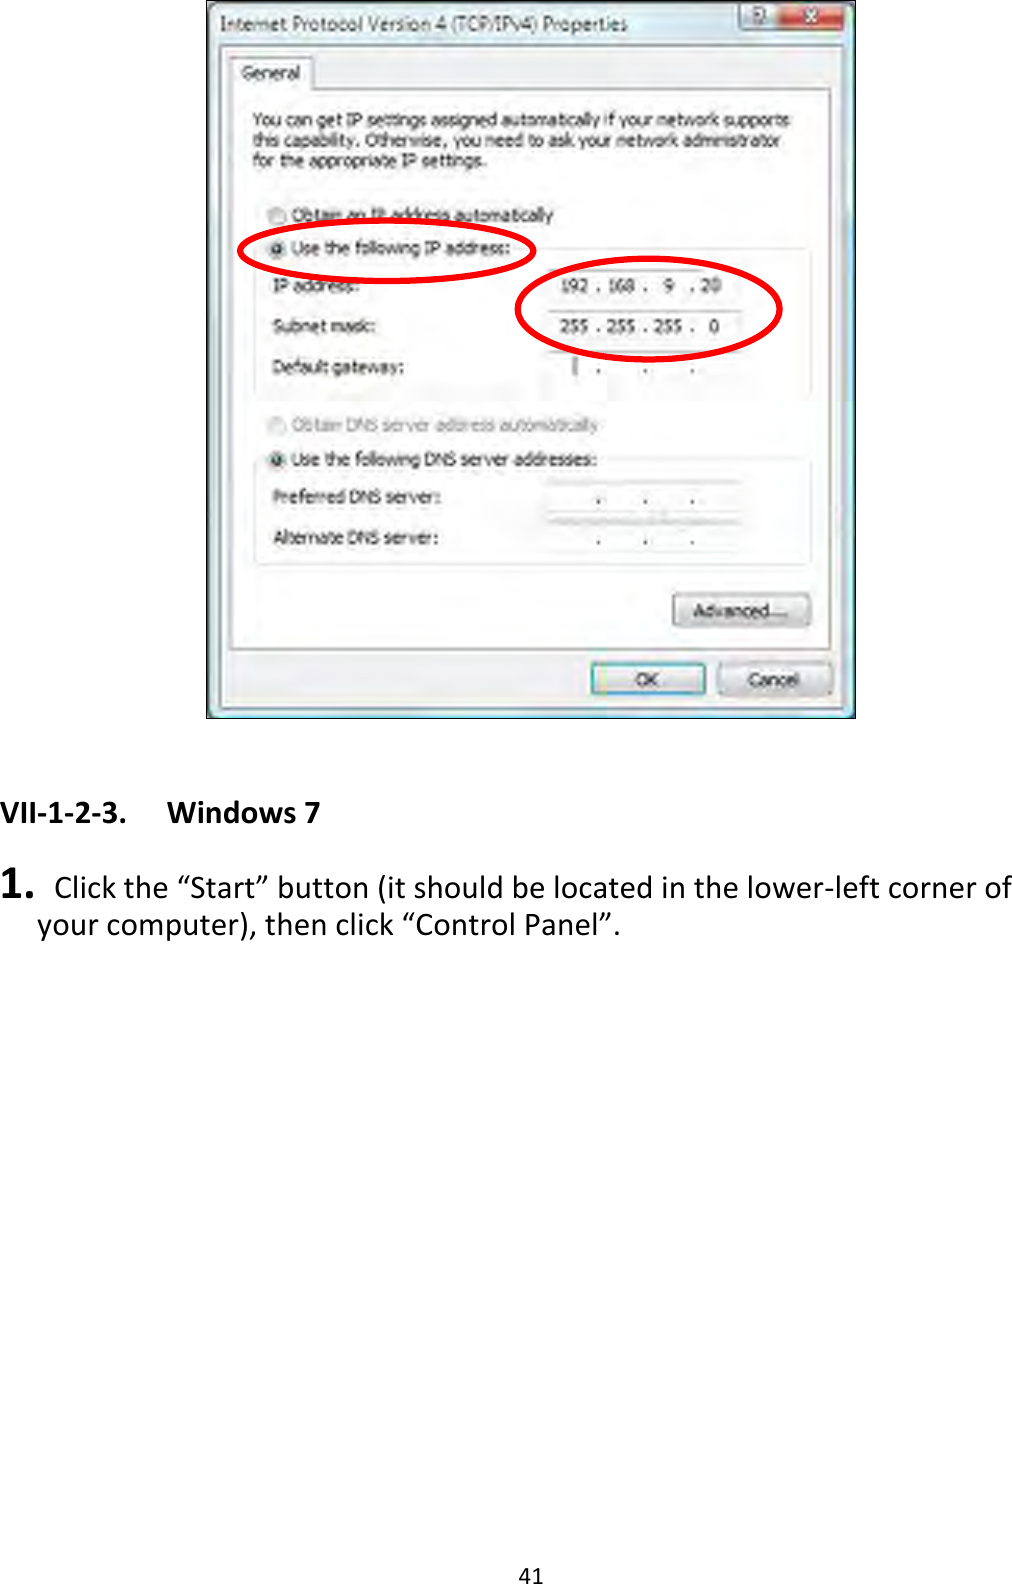 41   VII-1-2-3.    Windows 7  1.  Click the “Start” button (it should be located in the lower-left corner of your computer), then click “Control Panel”. 